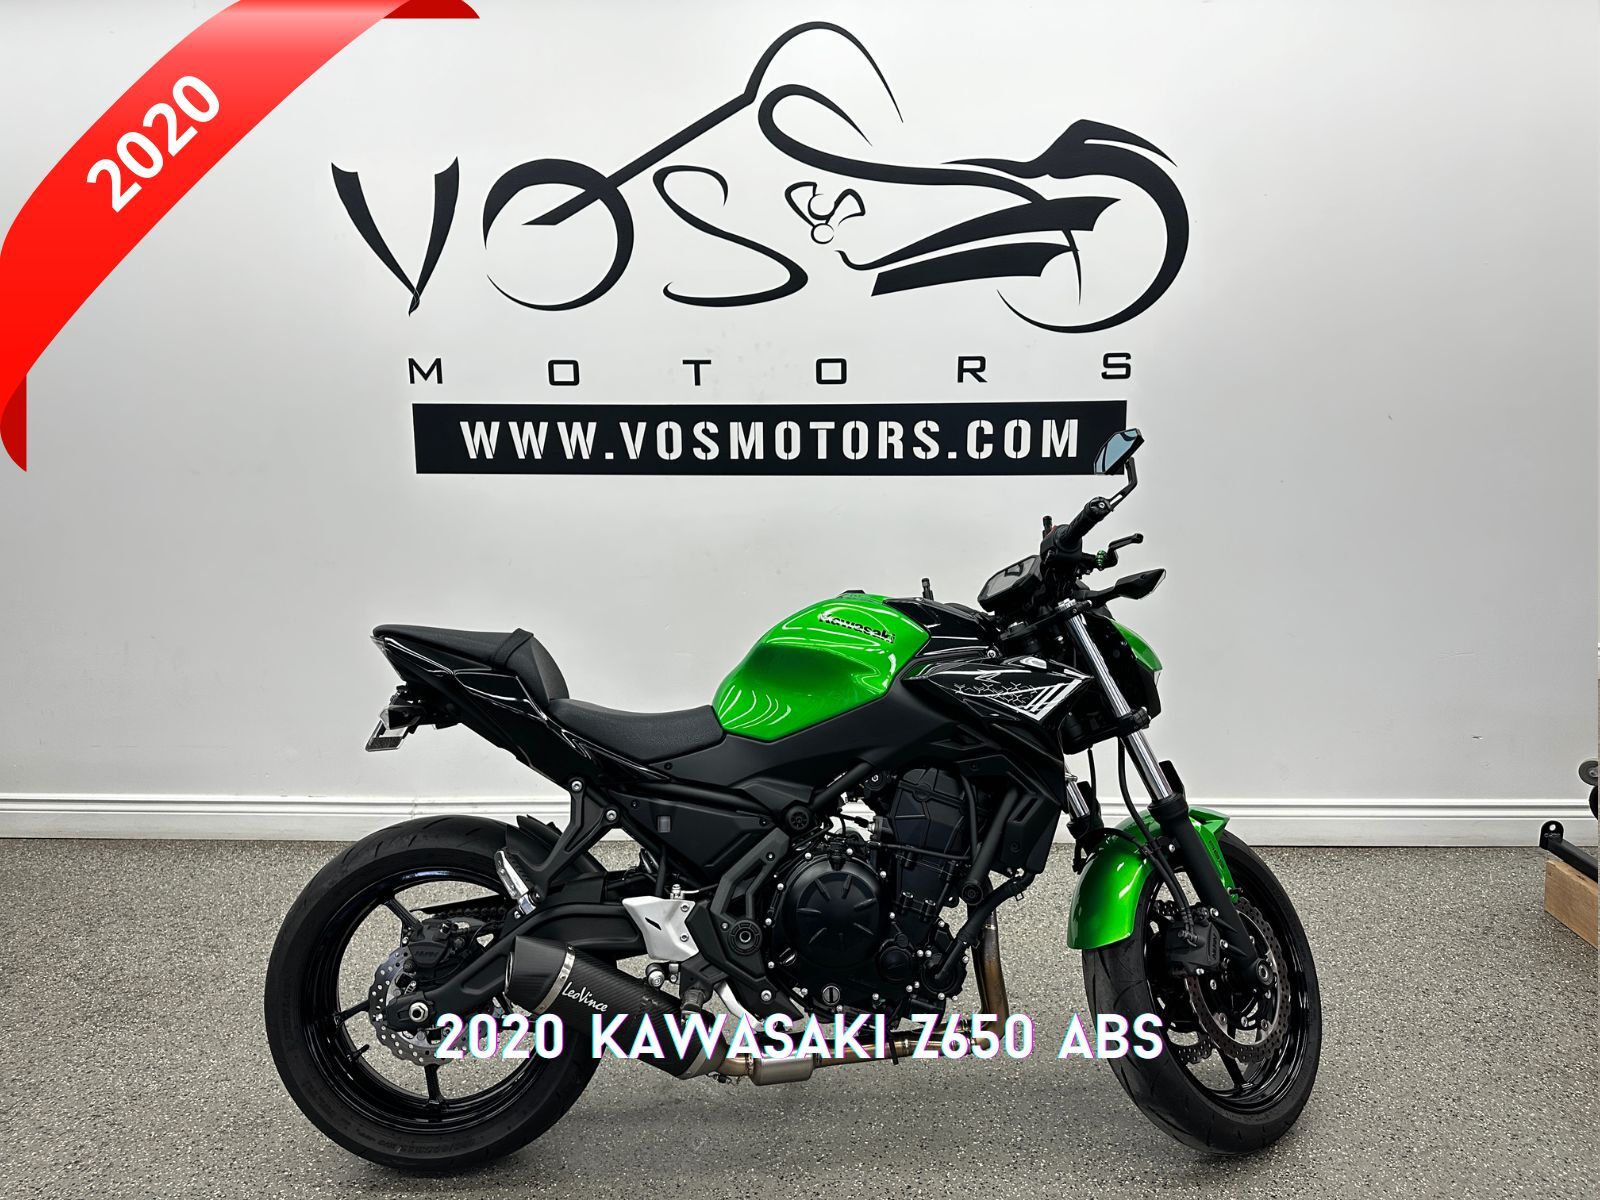 2020 Kawasaki ER650KLF Z650 ABS - v5797 - -No Payments for 1 Year**